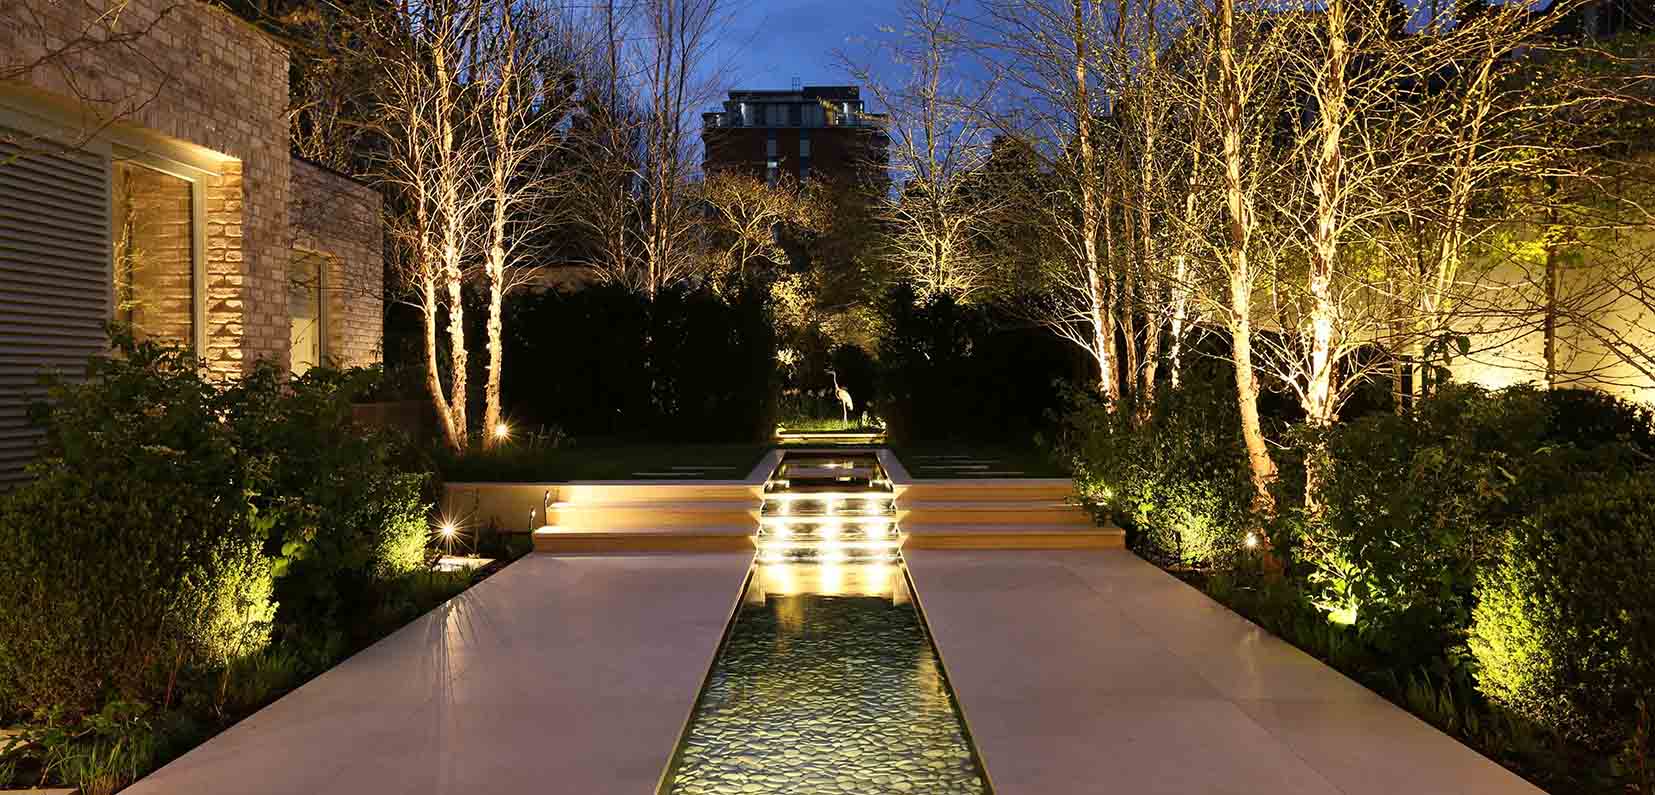 large garden with architectural gardens to uplight trees and water rill